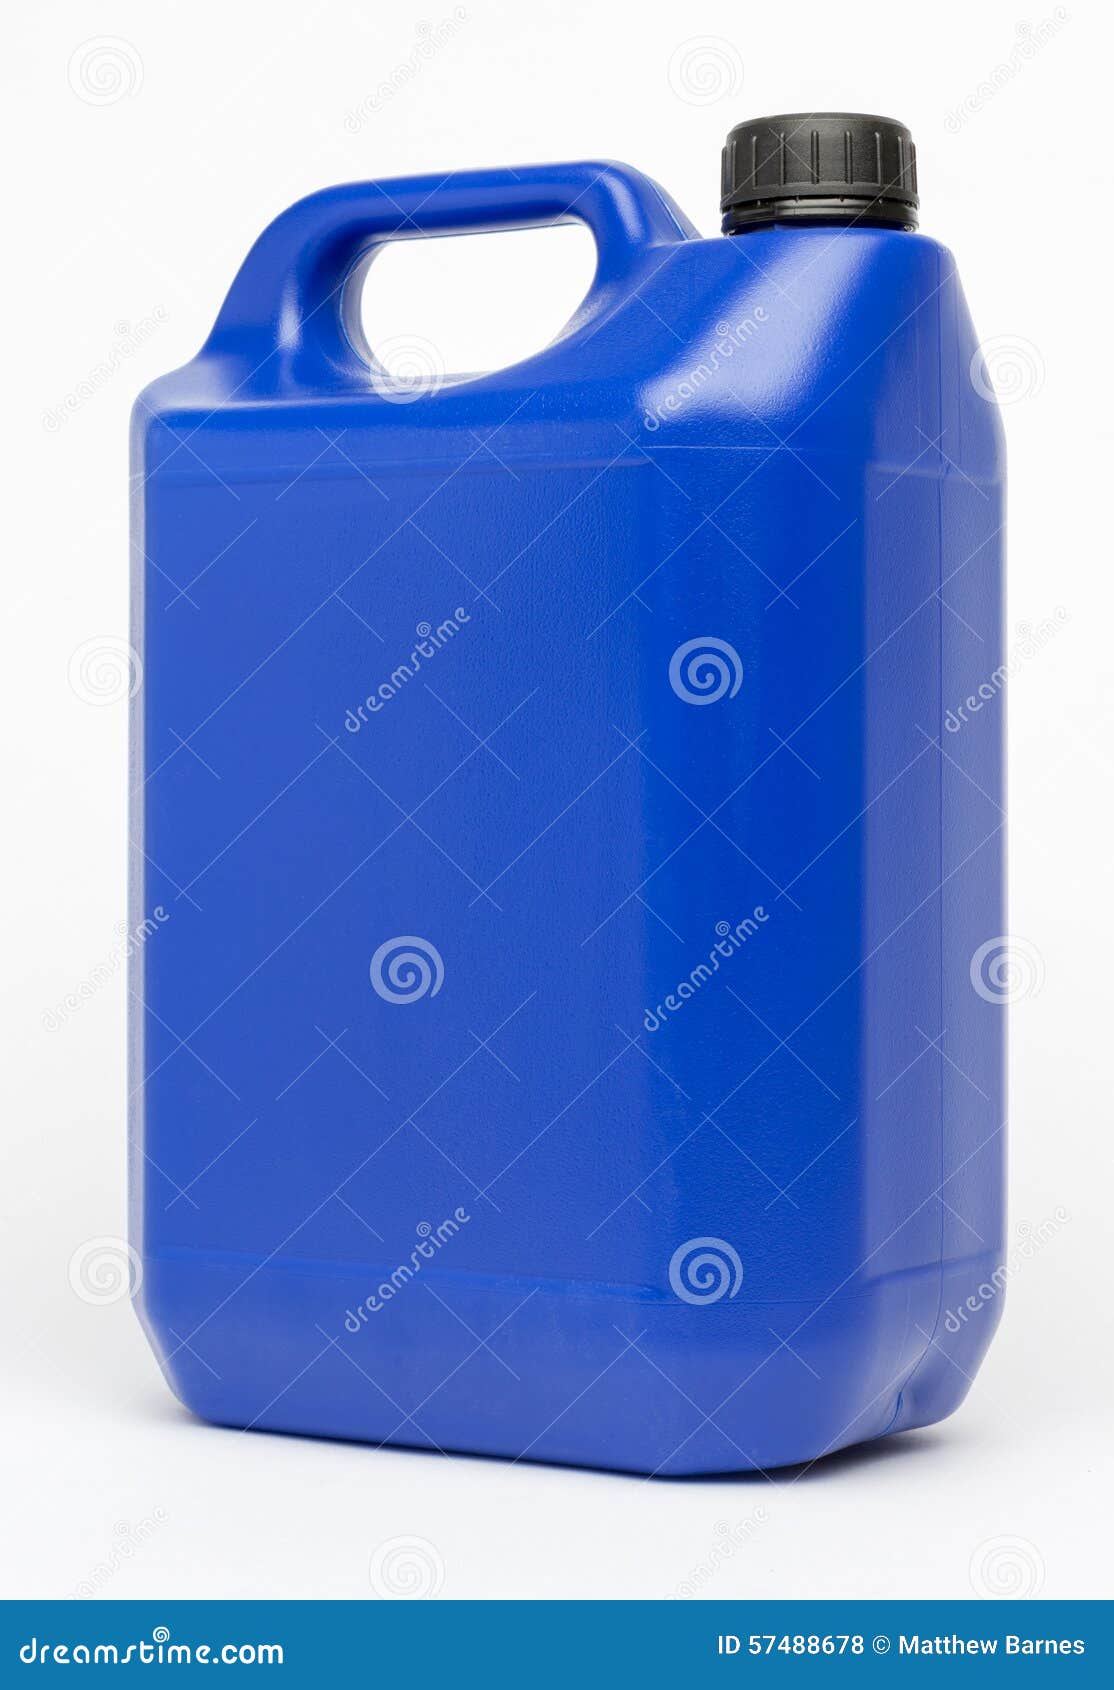 5L HDPE Plastic Jerrican stock photo. Image of blue, container - 57488678